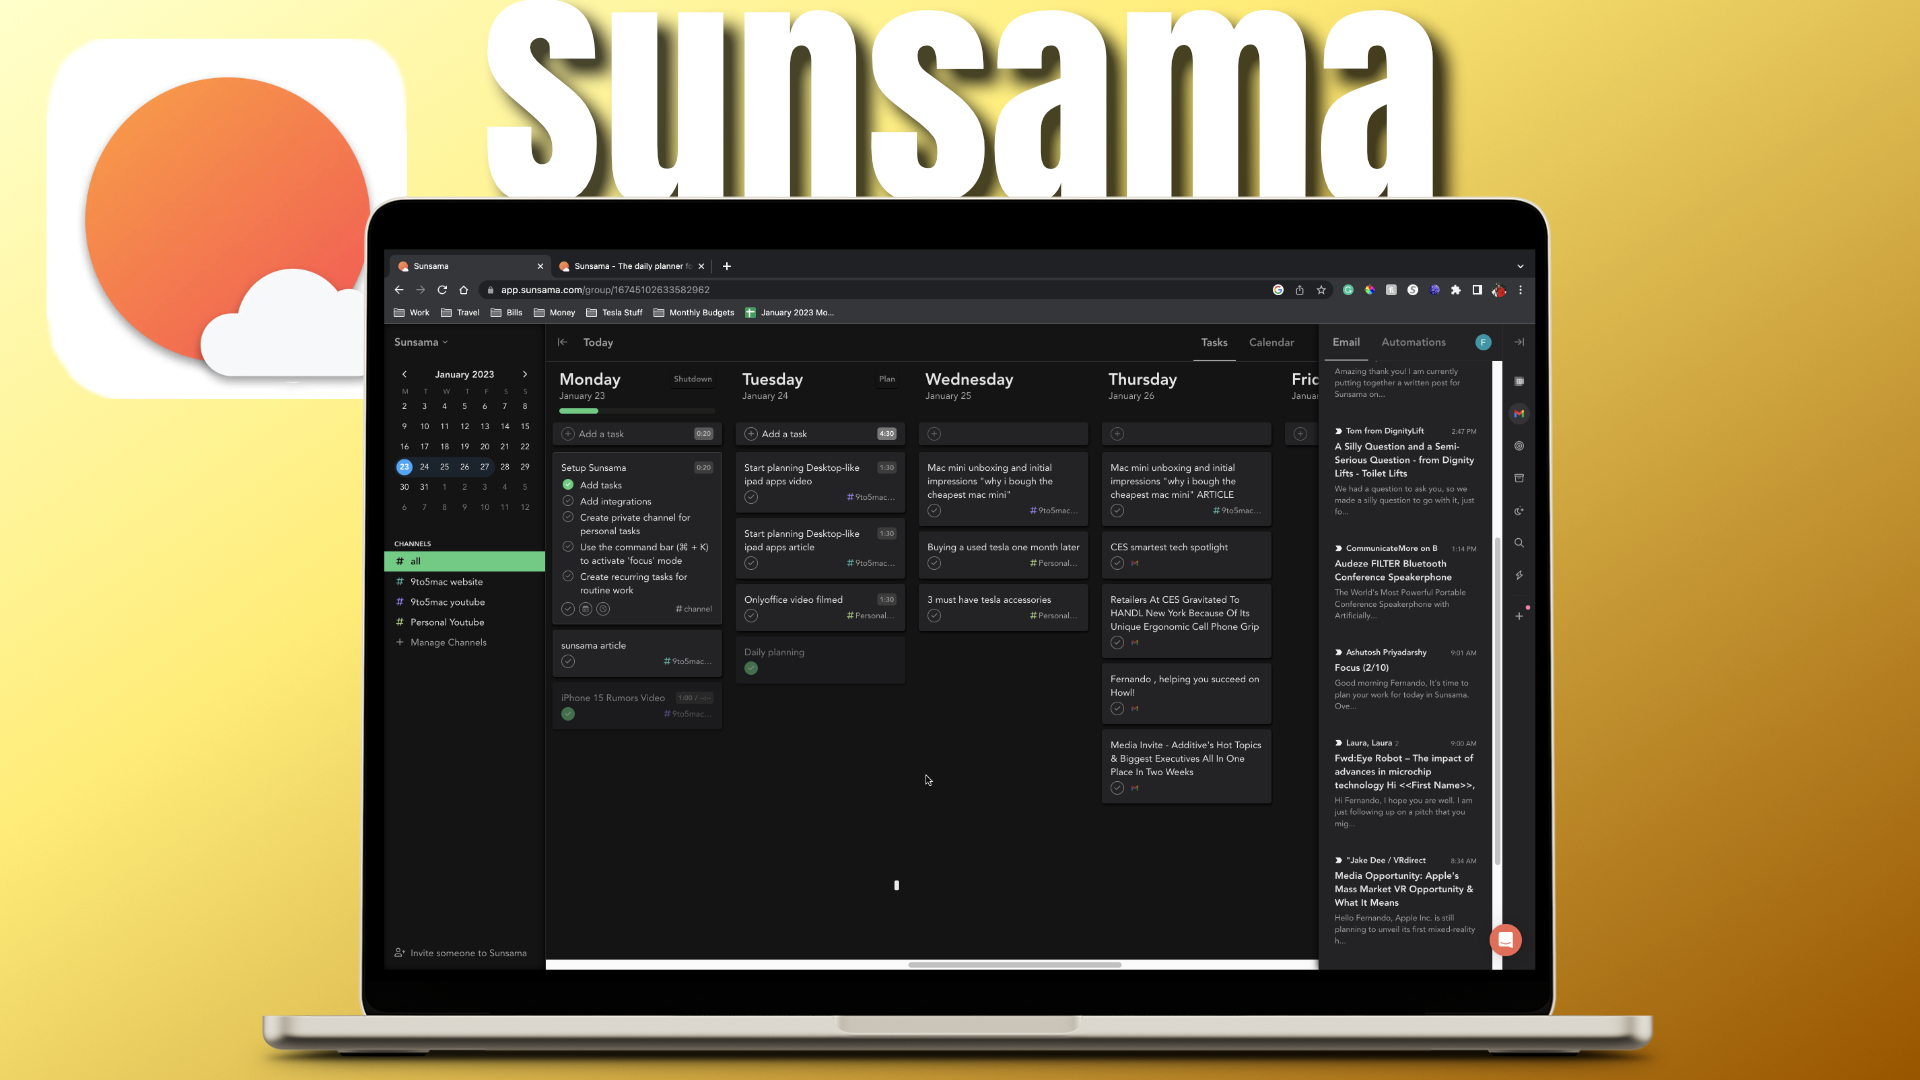 Hands-on: Sunsama is a new daily planner app that claims its not a productivity app